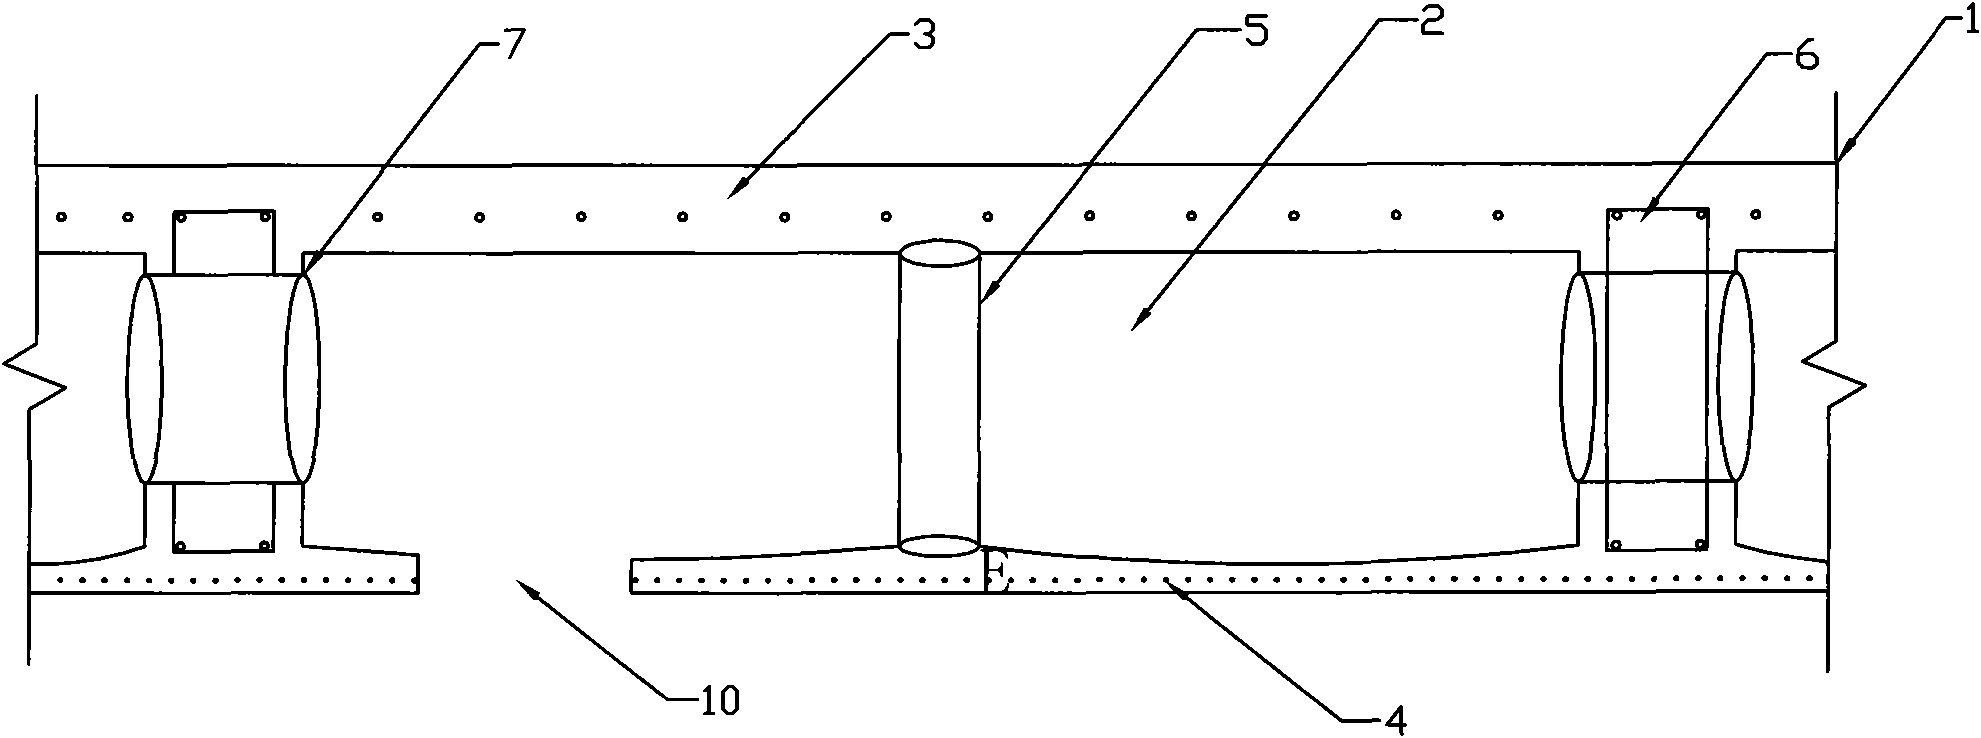 Solar heating system for building with cast-in-situ open-web floor